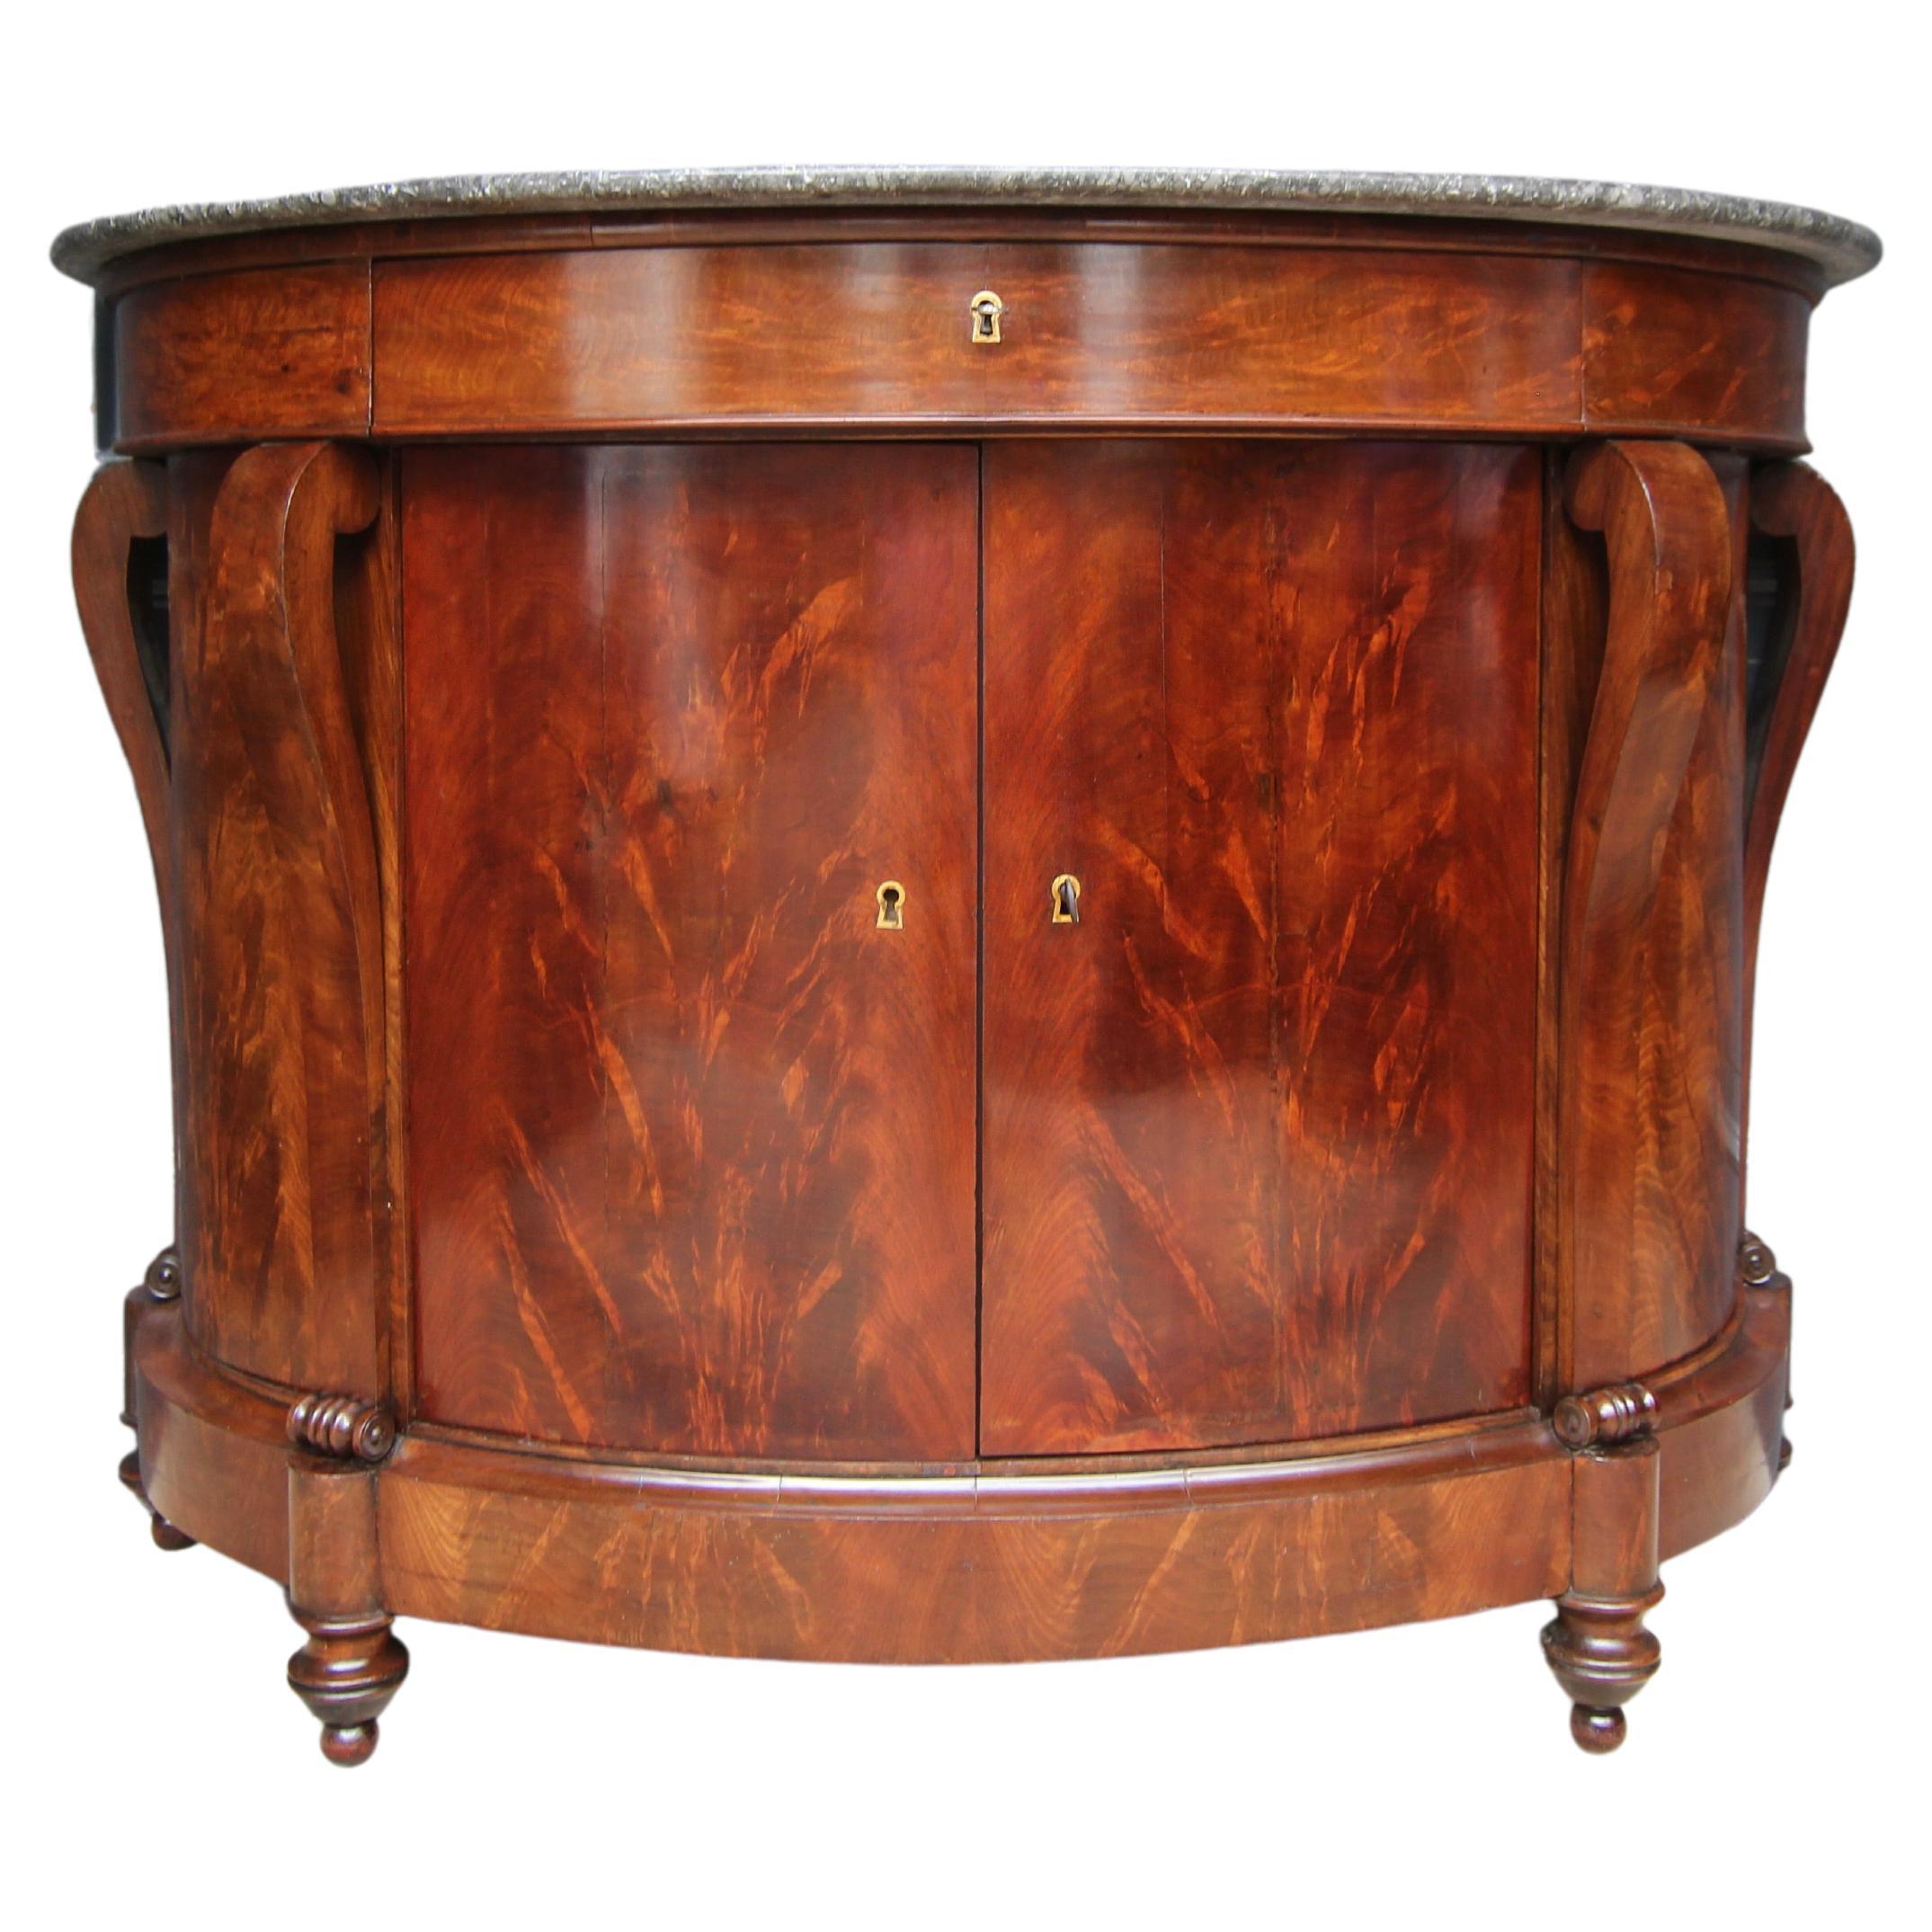 Early 19th Century French Empire Mahogany Demilune Cabinet For Sale